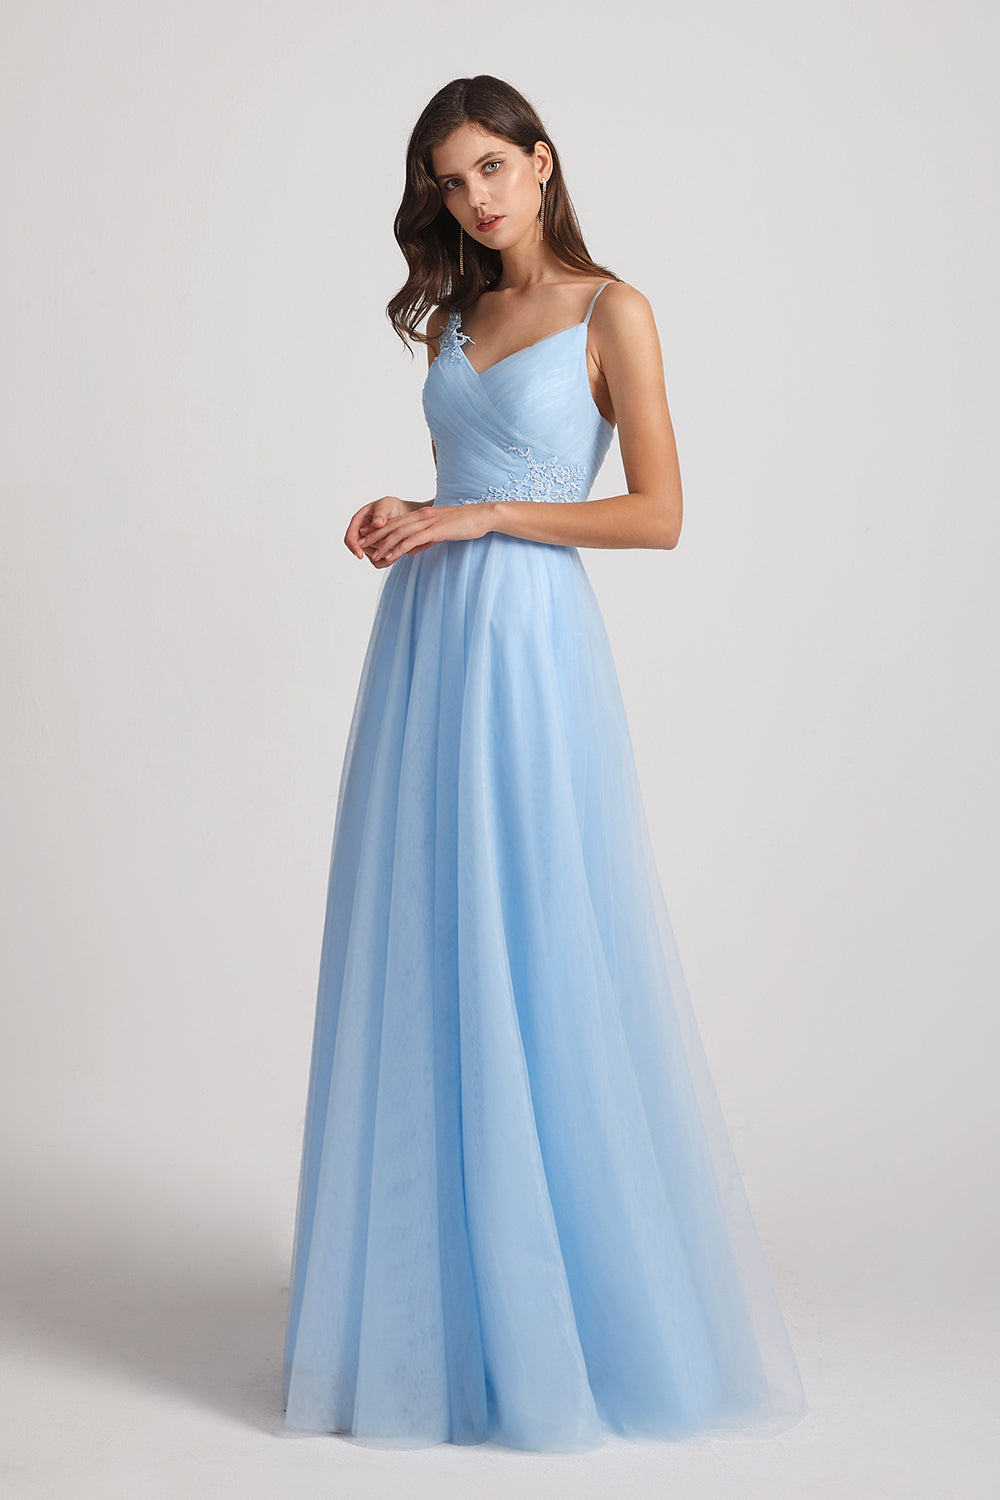 Baby Blue Tulle Bridesmaid Dresses